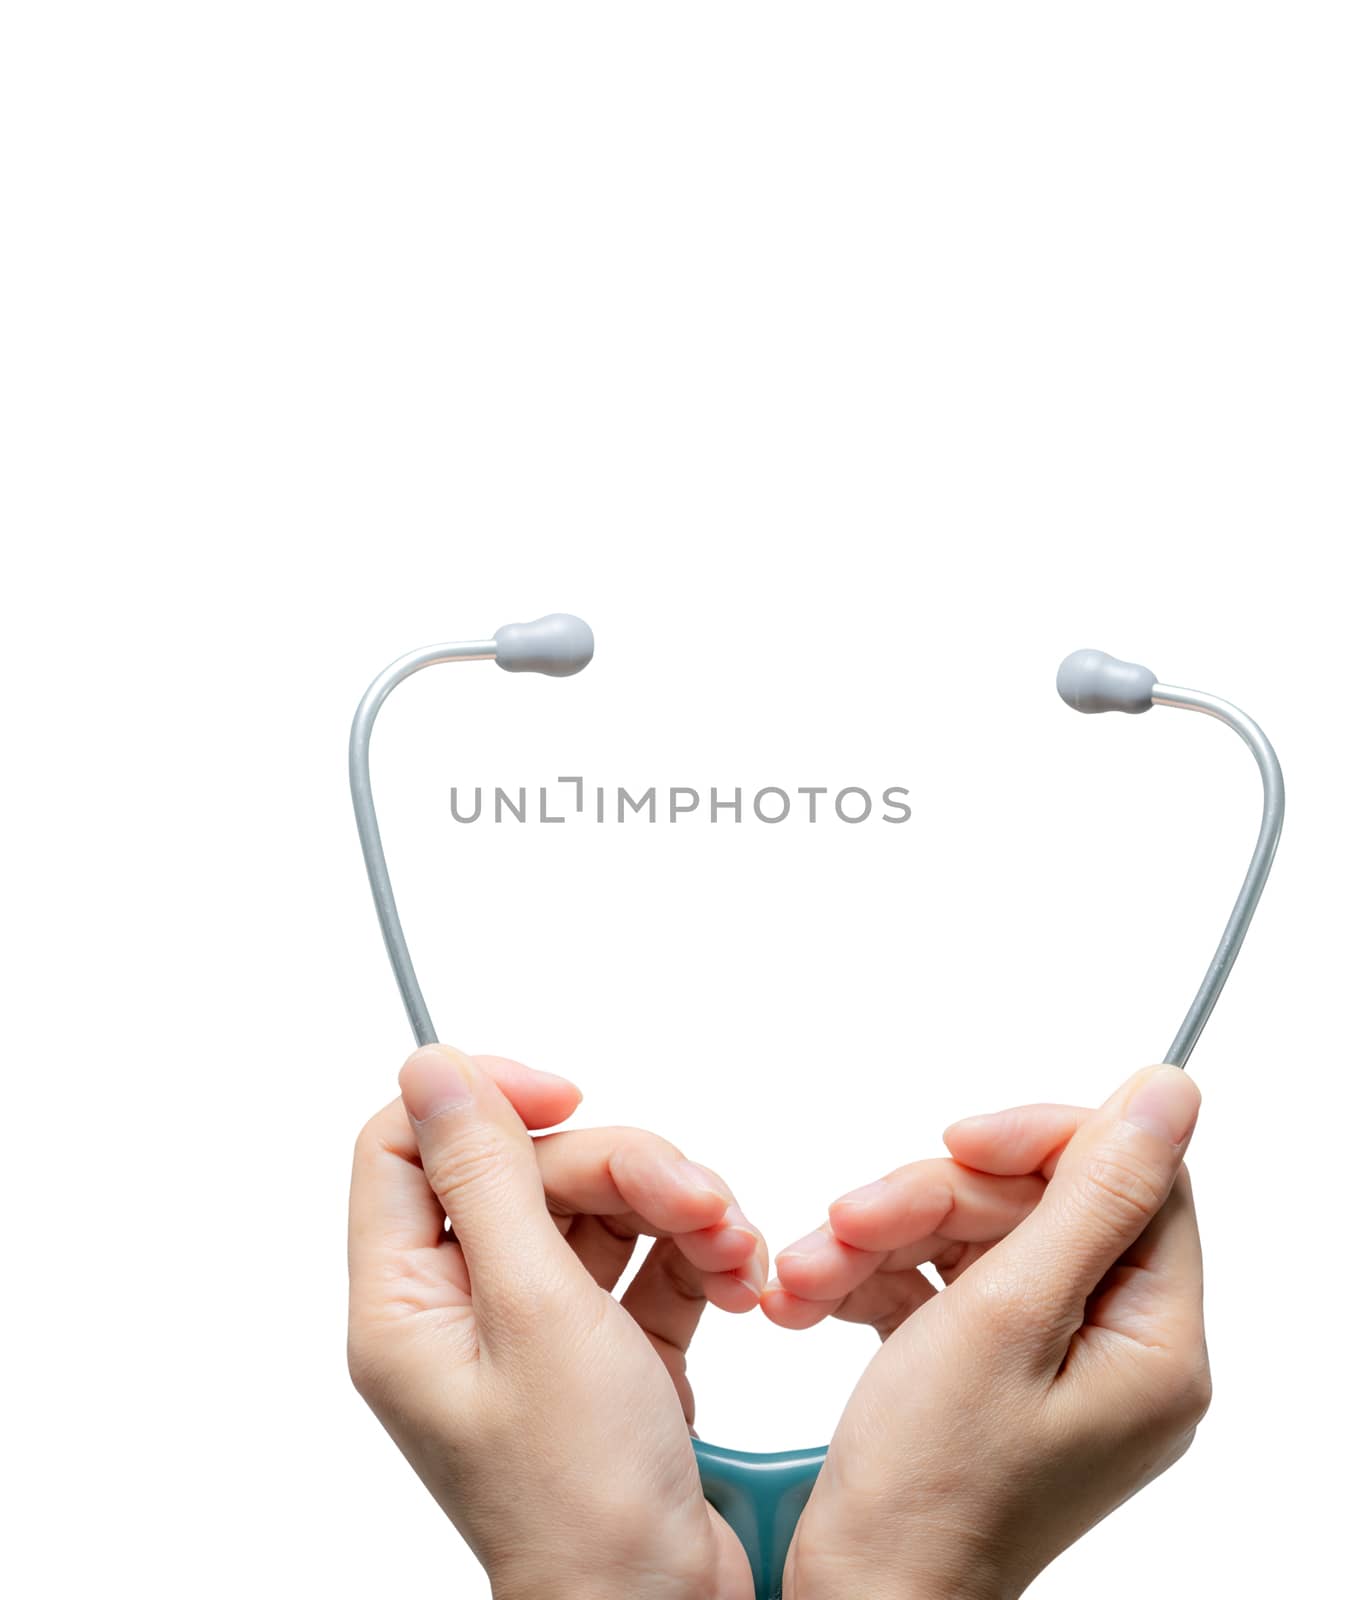 Hand hold stethoscope isolated on white background. Health checkup. Healthcare and medicine background. Diagnostic medical tool for patient diagnosis. Cardiology doctor. Heart care and healthcare.